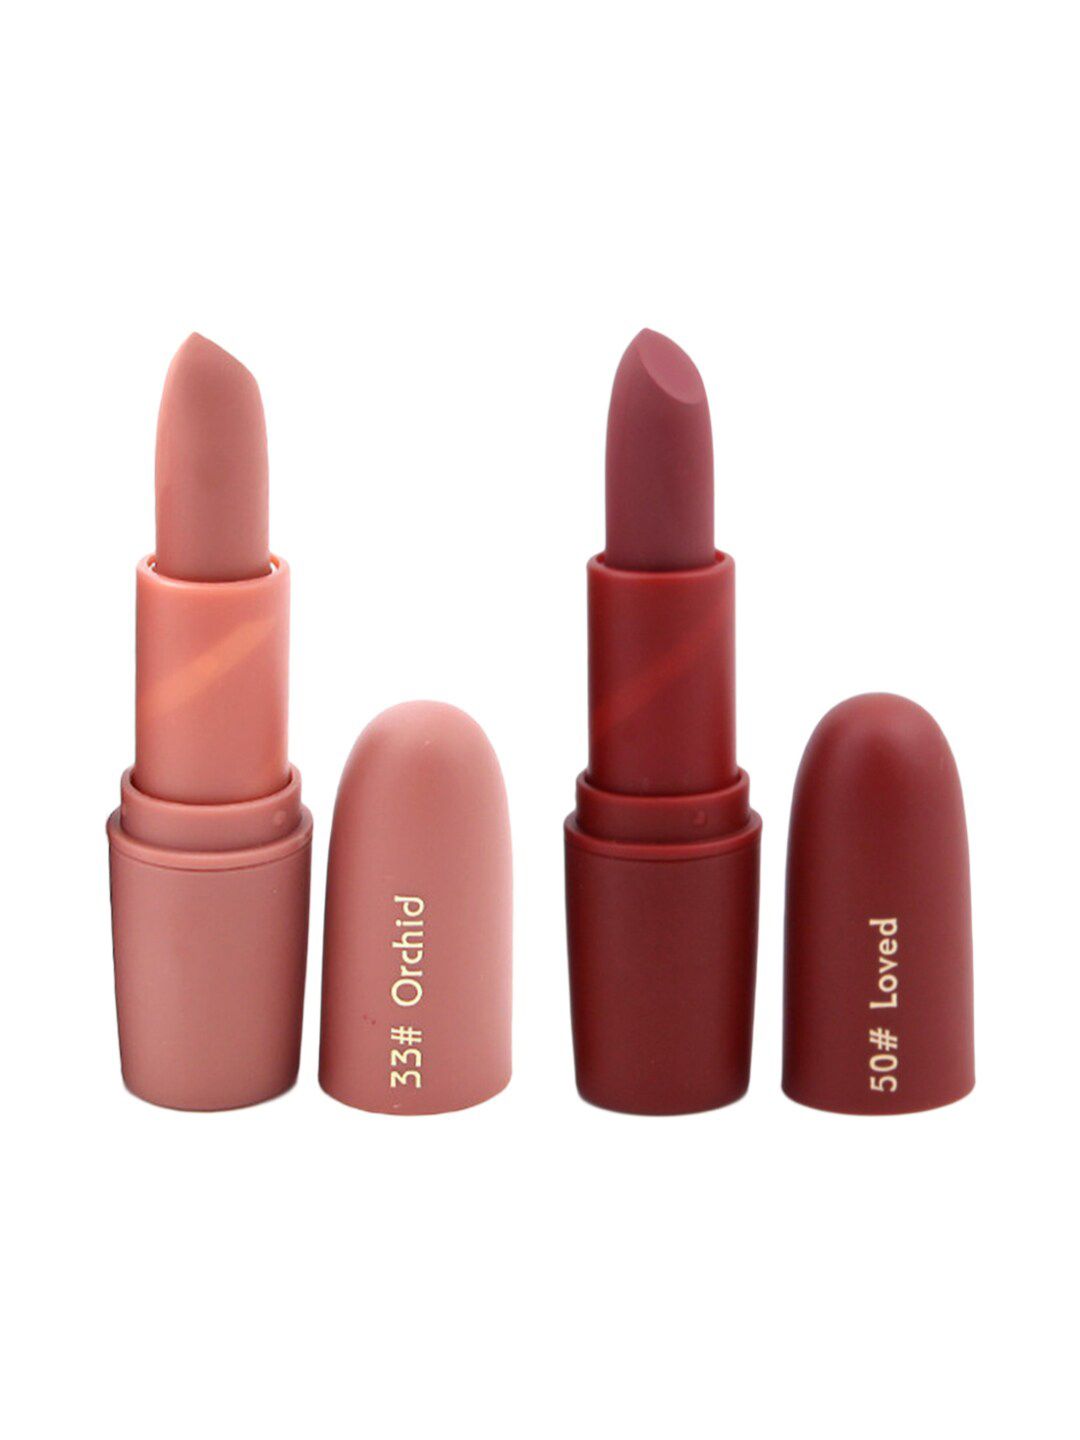 MISS ROSE Set of 2 Matte Creamy Lipsticks - Orchid 33 & Loved 50 Price in India